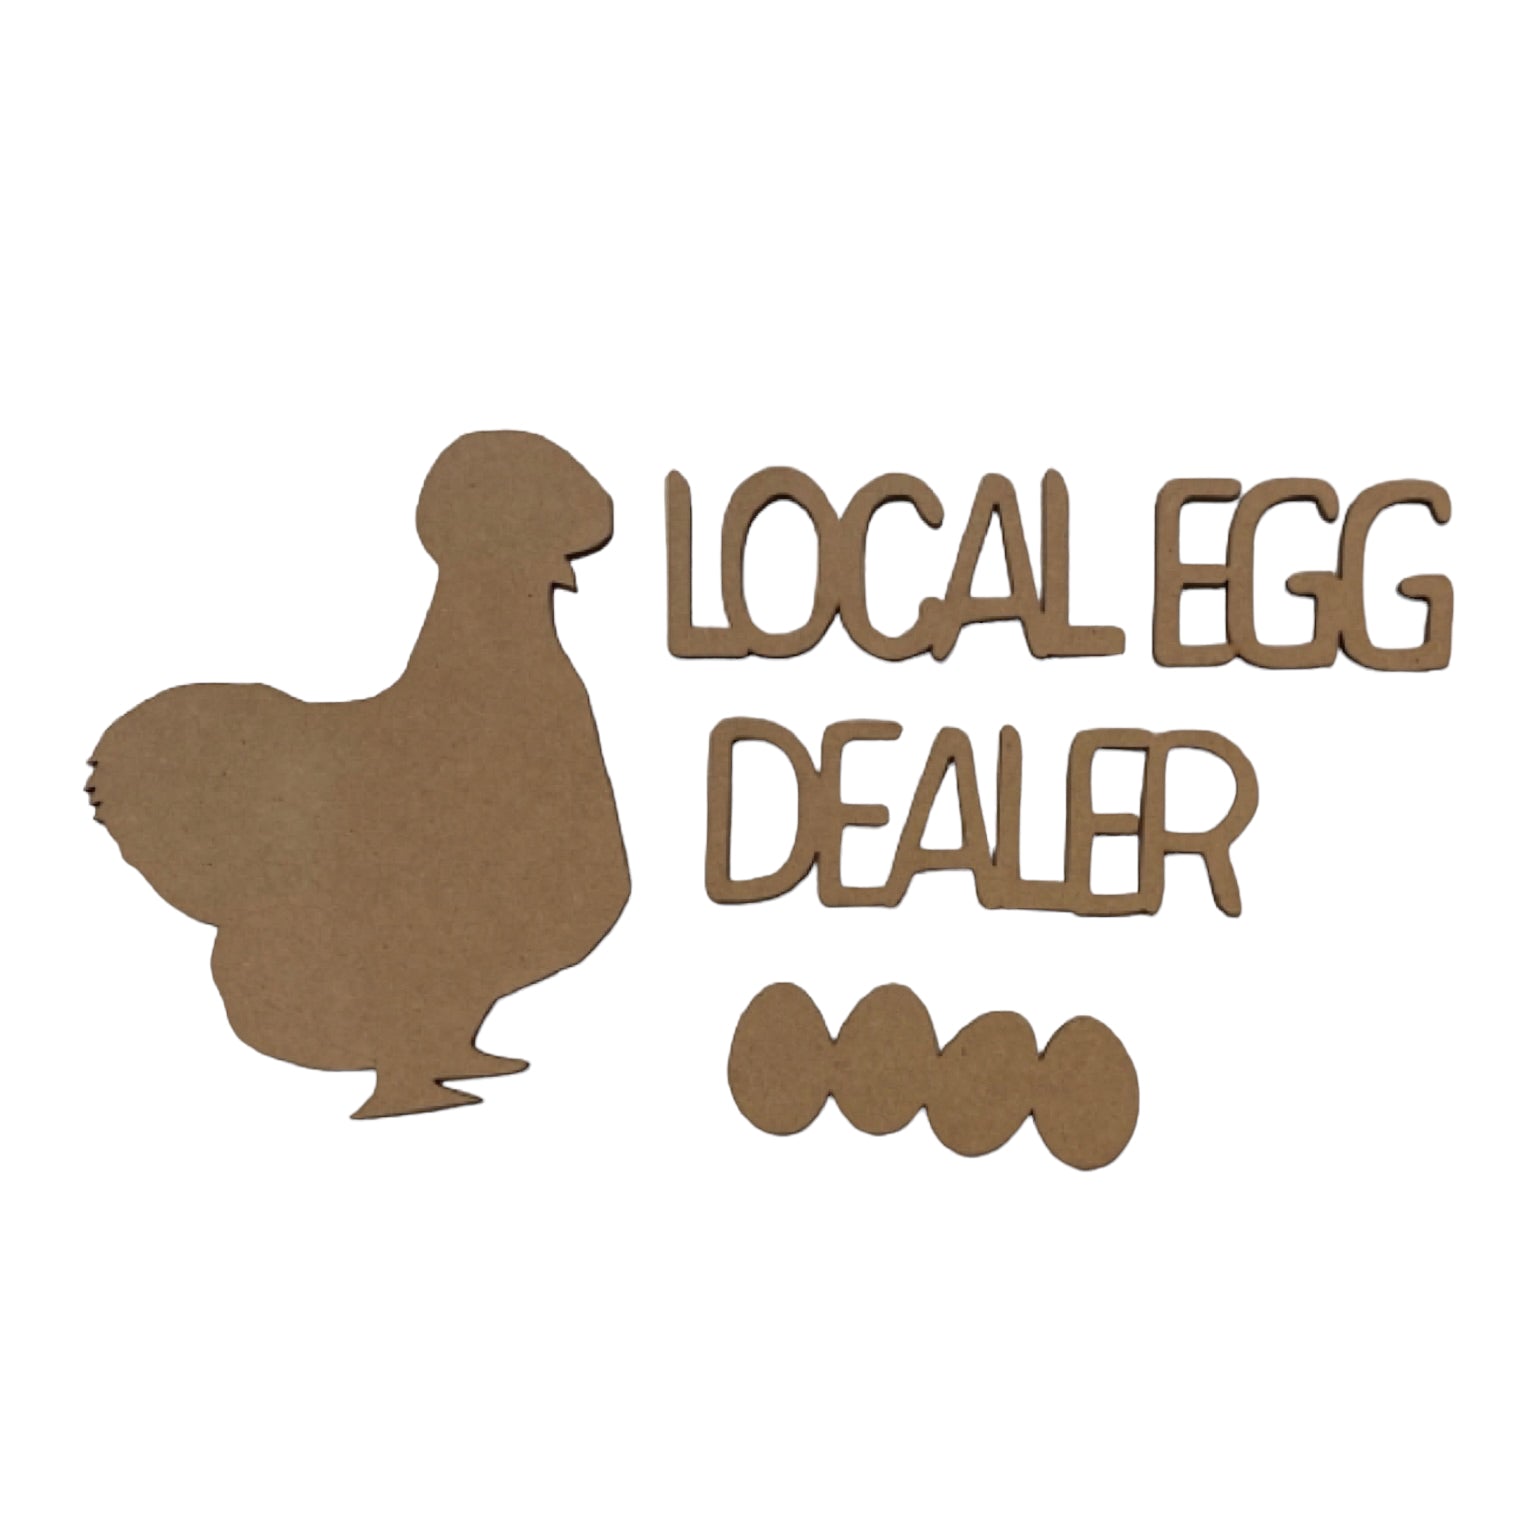 Chicken Silkie Egg Local Dealer Sign MDF Wood DIY Craft - The Renmy Store Homewares & Gifts 